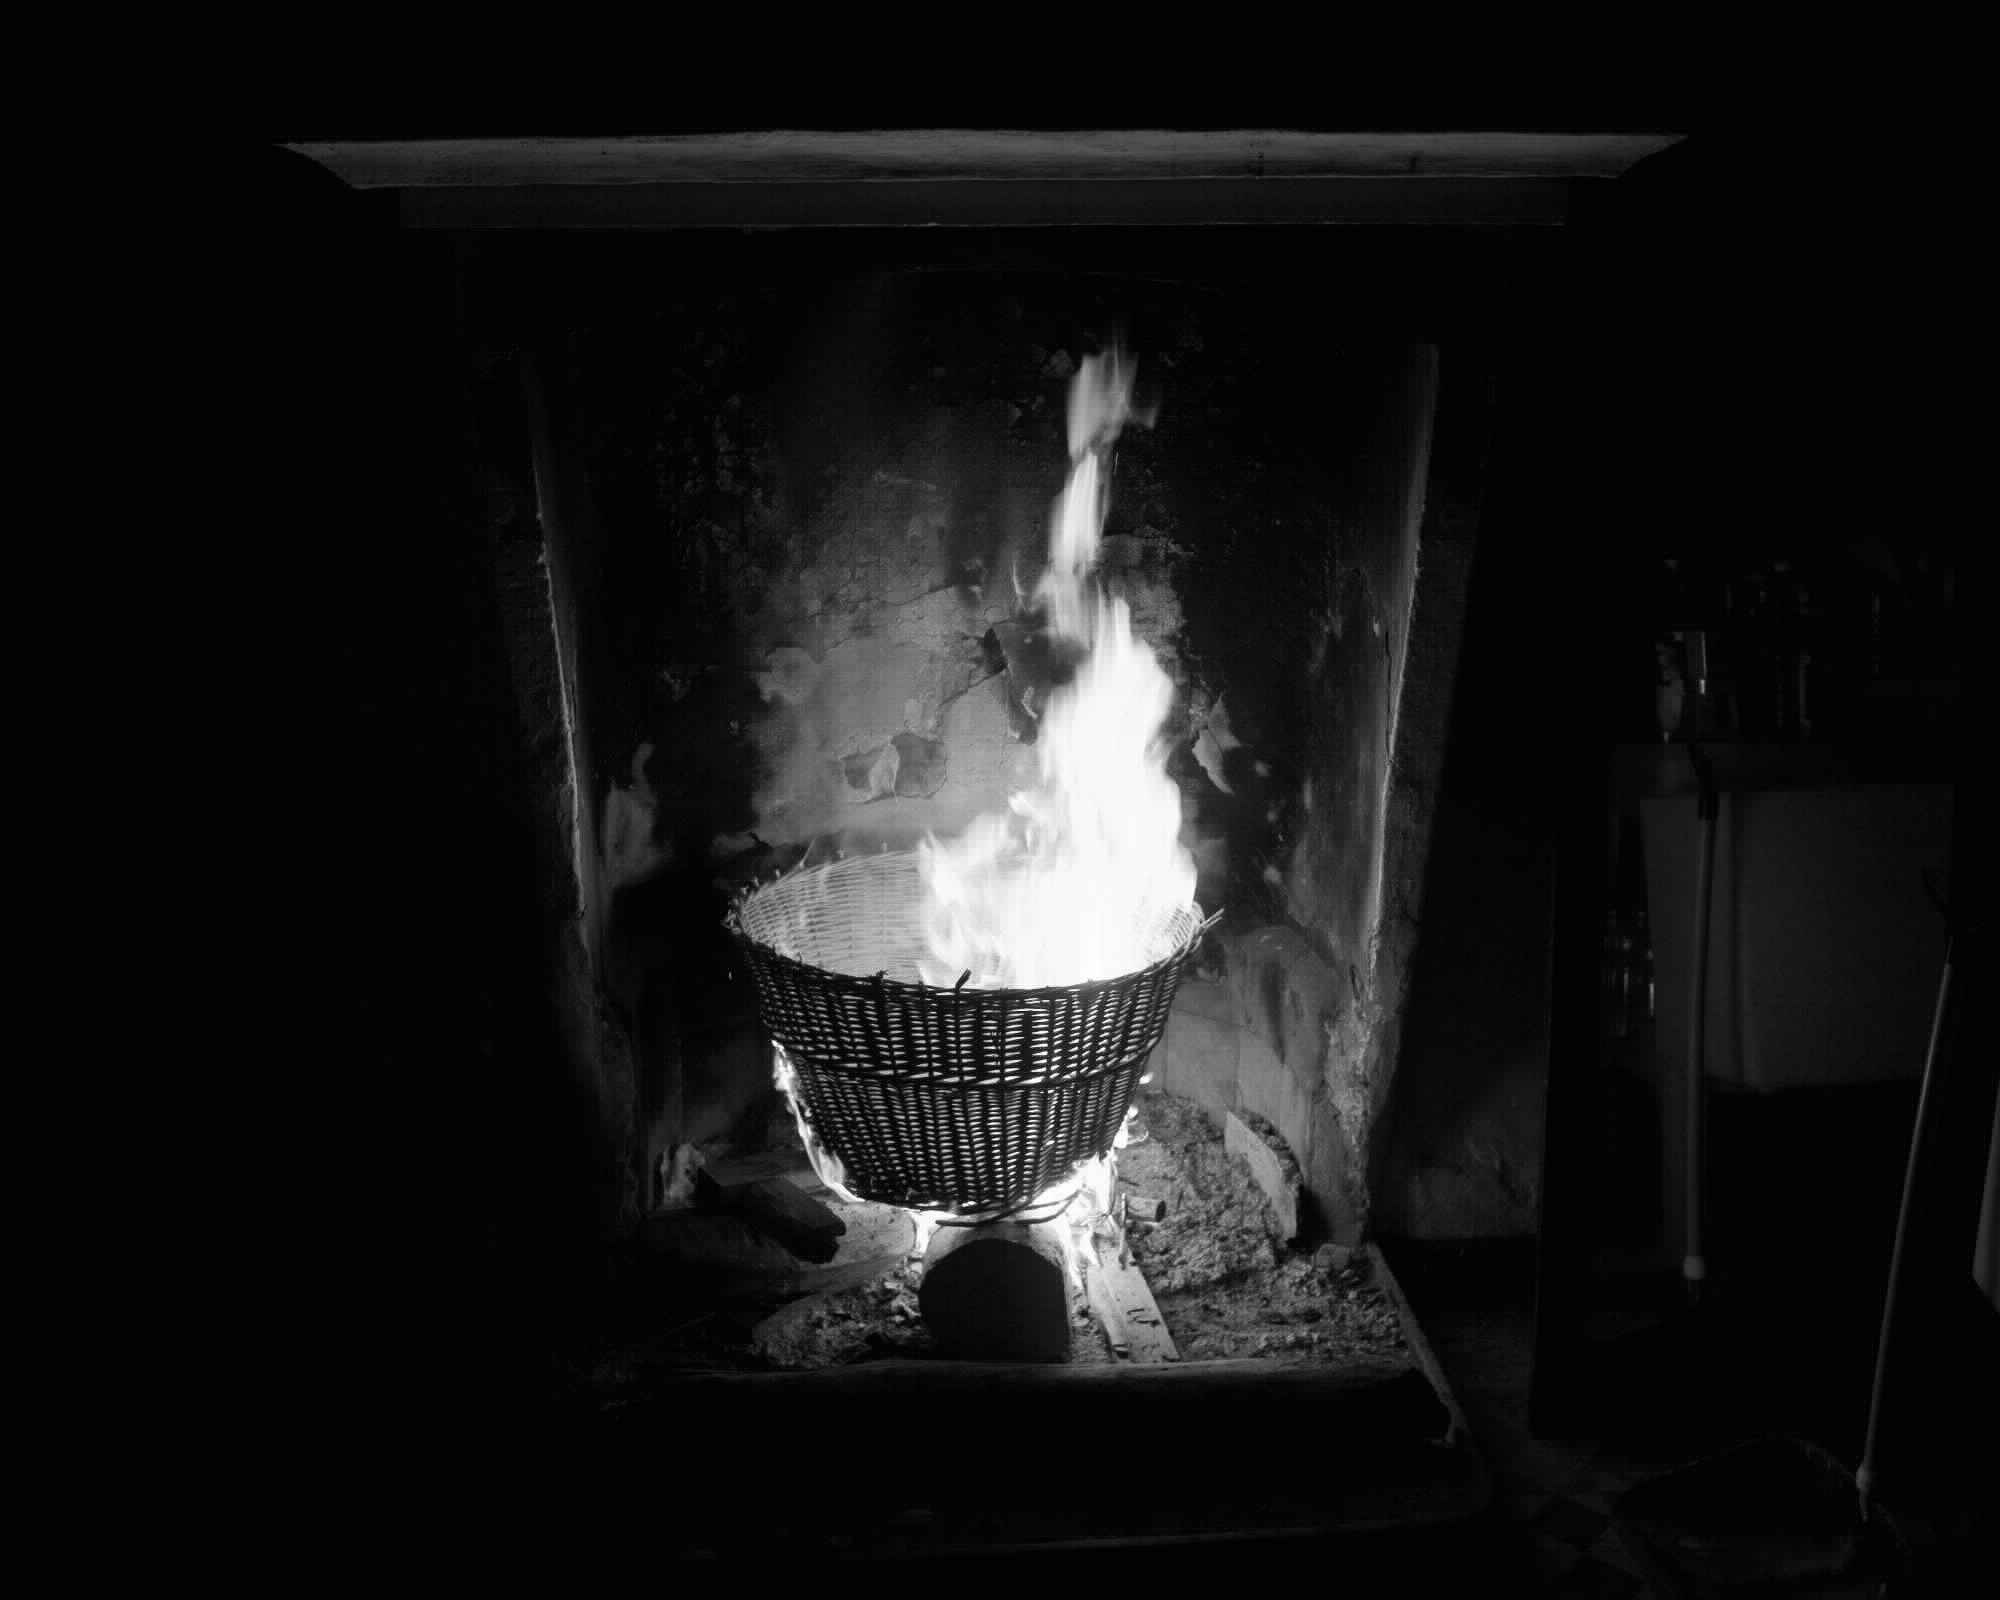 four photographs of burning objects in a fireplace